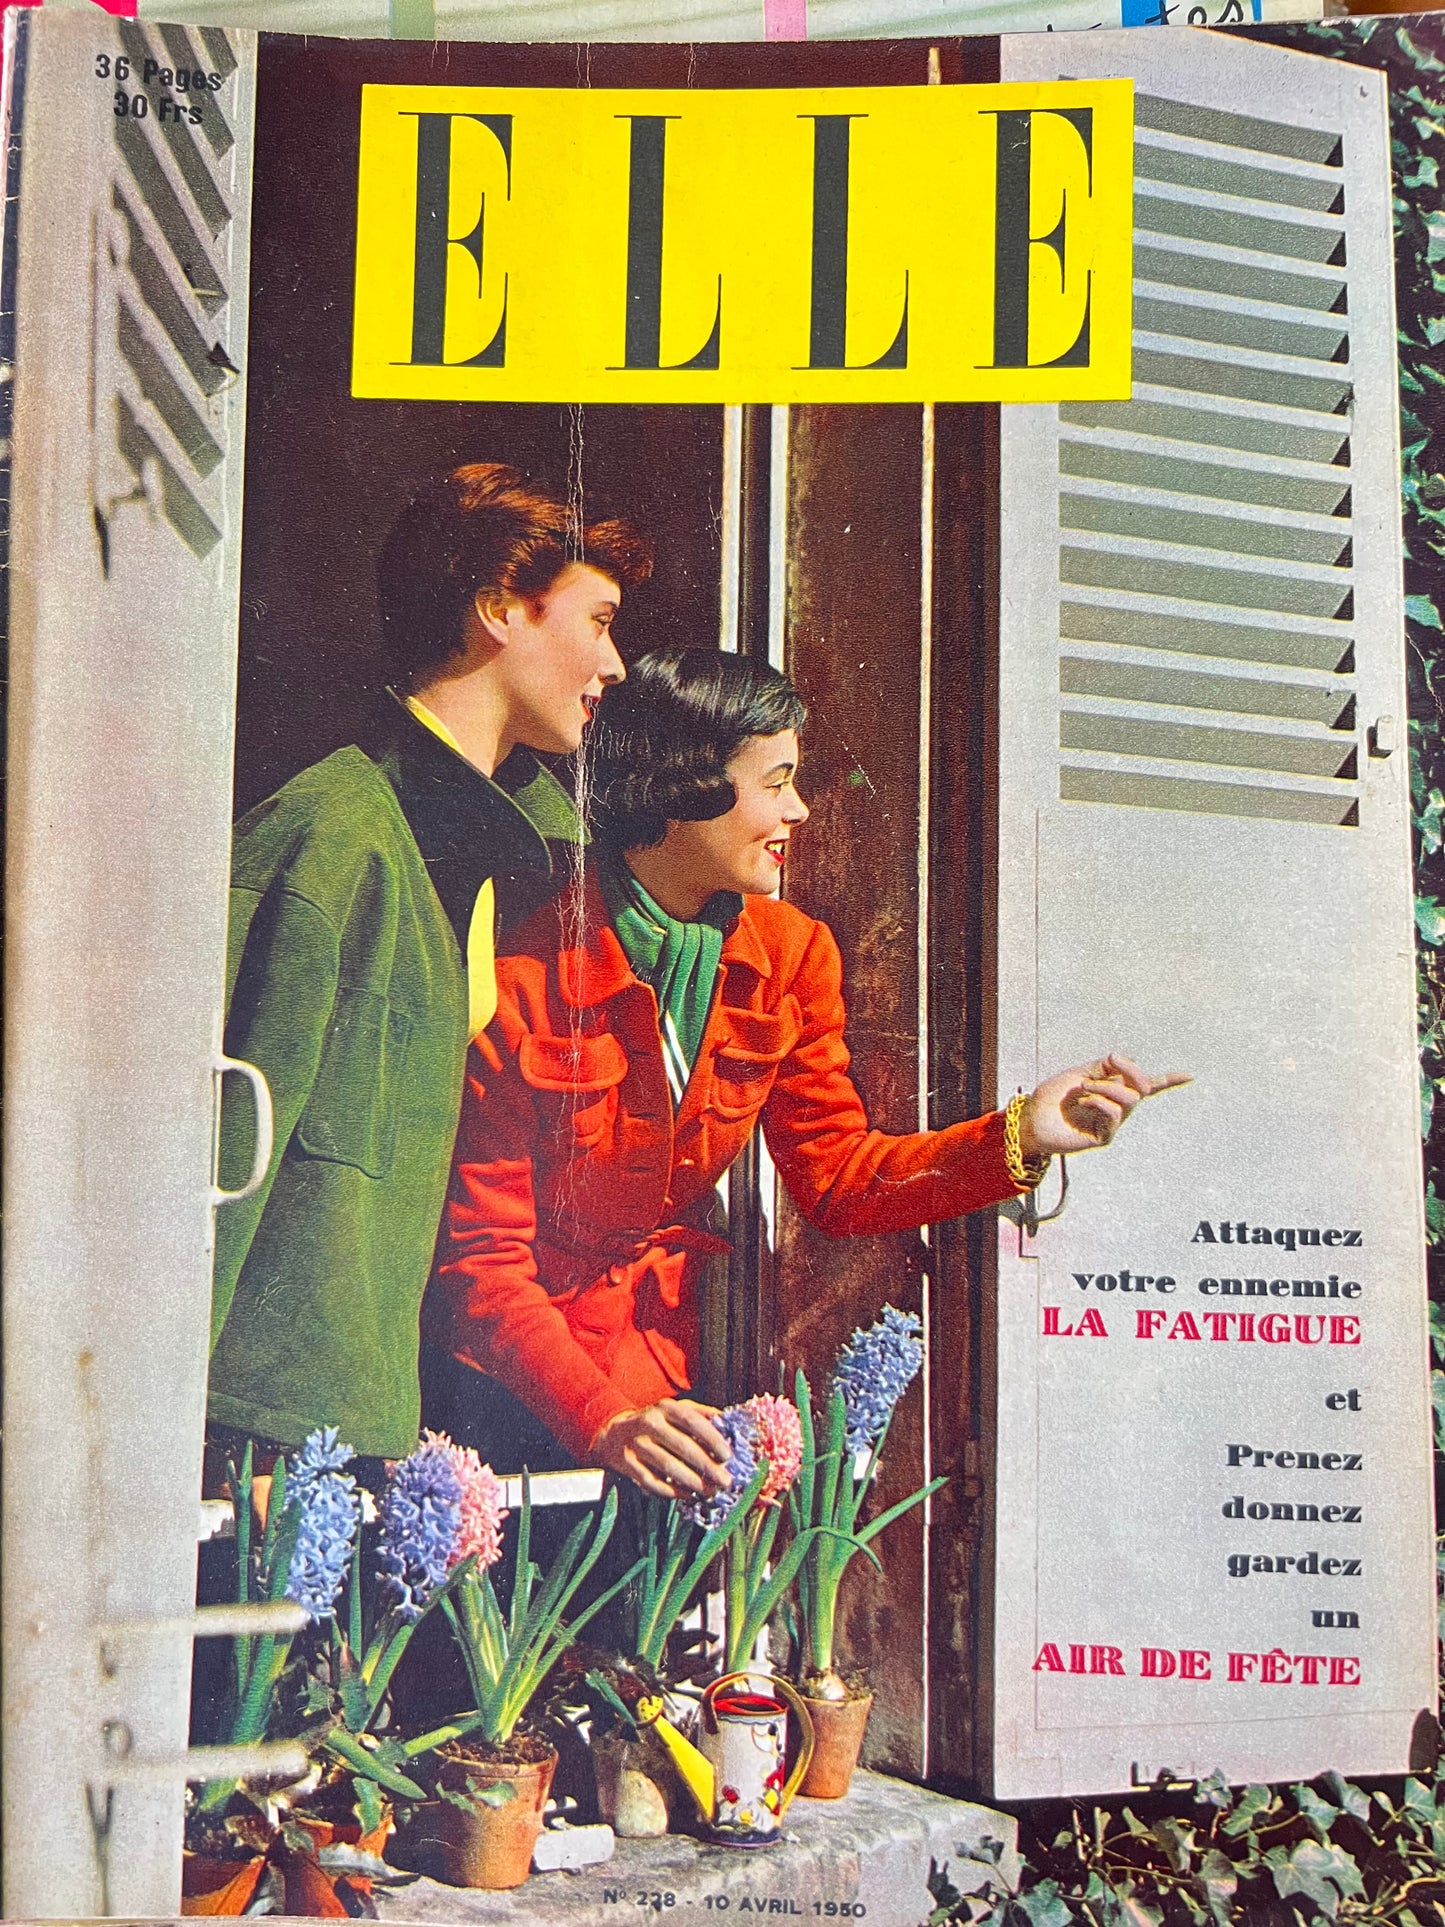 10th April 1950 issue of French ELLE Fashion Magazine